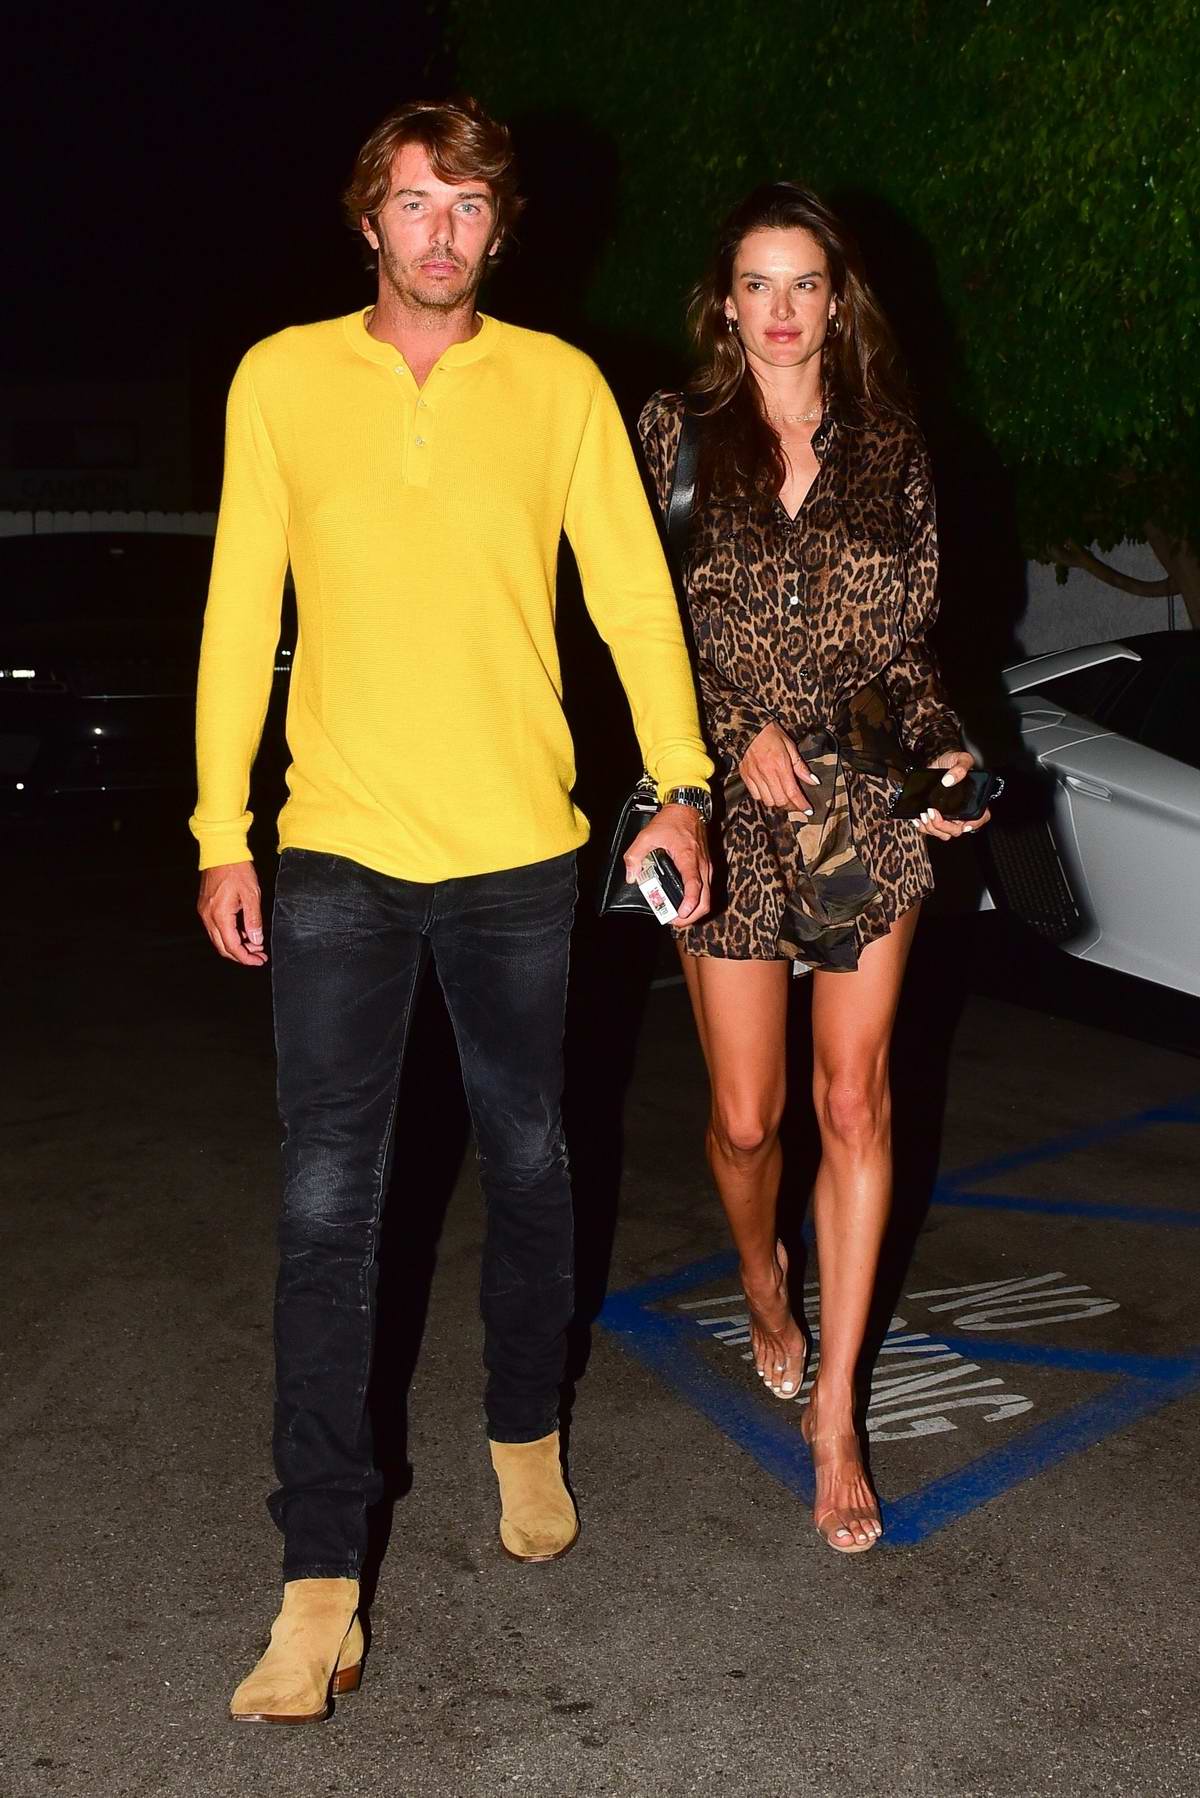 alessandra ambrosio looks stunning in animal print during a date